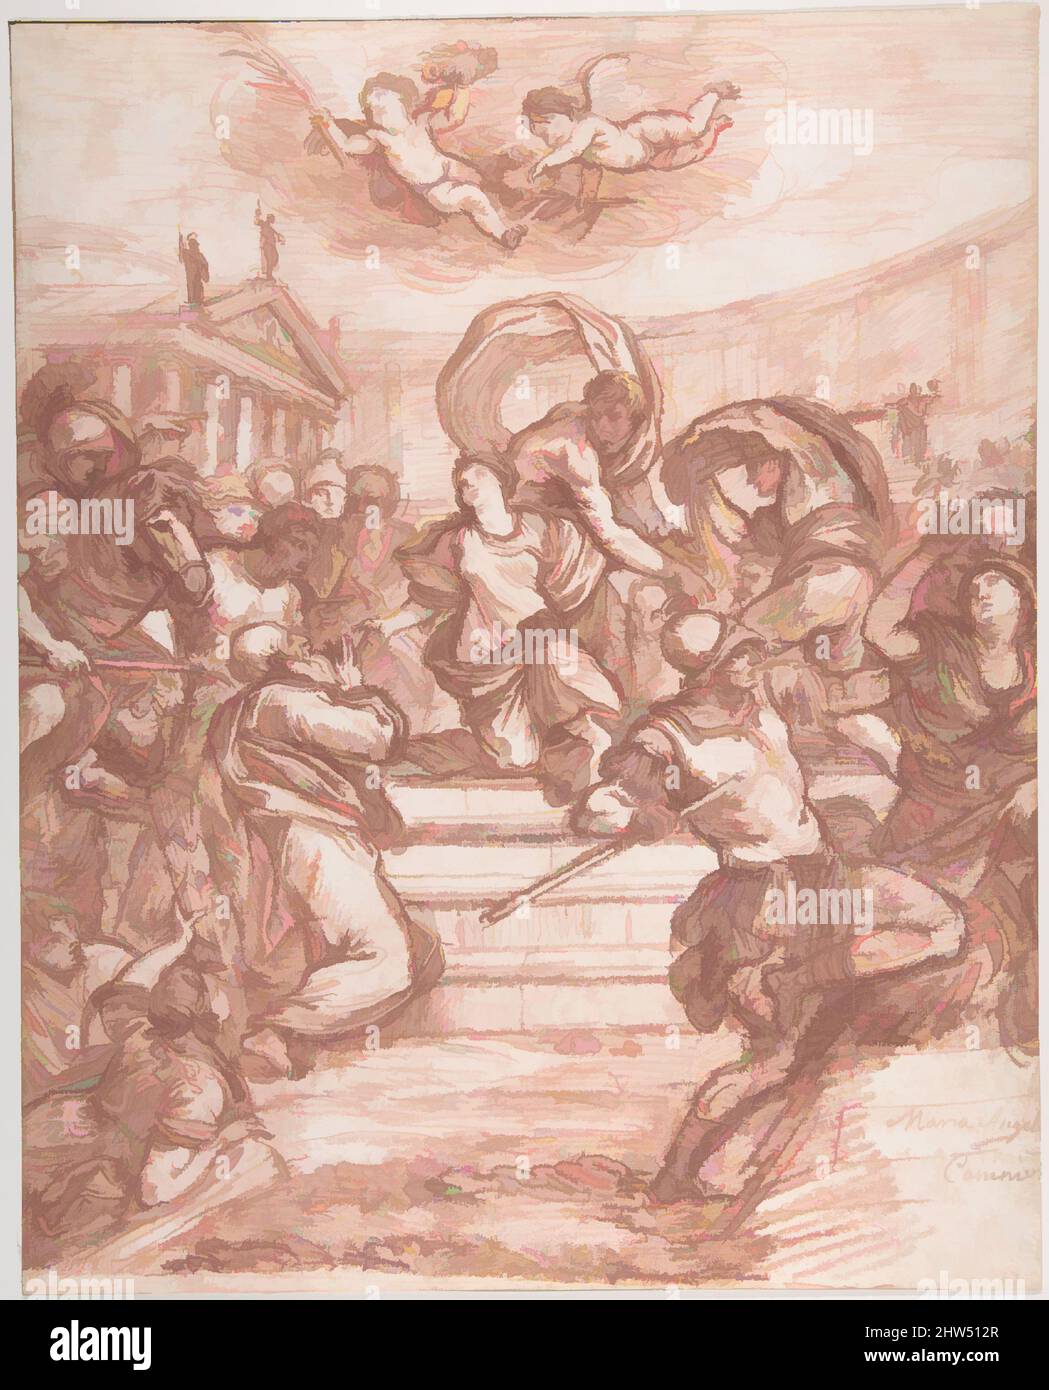 Art inspired by Scene of Martyrdom, after Giovanni Angelo Canini, Red chalk, over traces of black chalk, 14 15/16 x 12 in. (38 x 30.5 cm), Drawings, Jean Robert Ango (French, active Rome, 1759–70, died after 1773, Classic works modernized by Artotop with a splash of modernity. Shapes, color and value, eye-catching visual impact on art. Emotions through freedom of artworks in a contemporary way. A timeless message pursuing a wildly creative new direction. Artists turning to the digital medium and creating the Artotop NFT Stock Photo